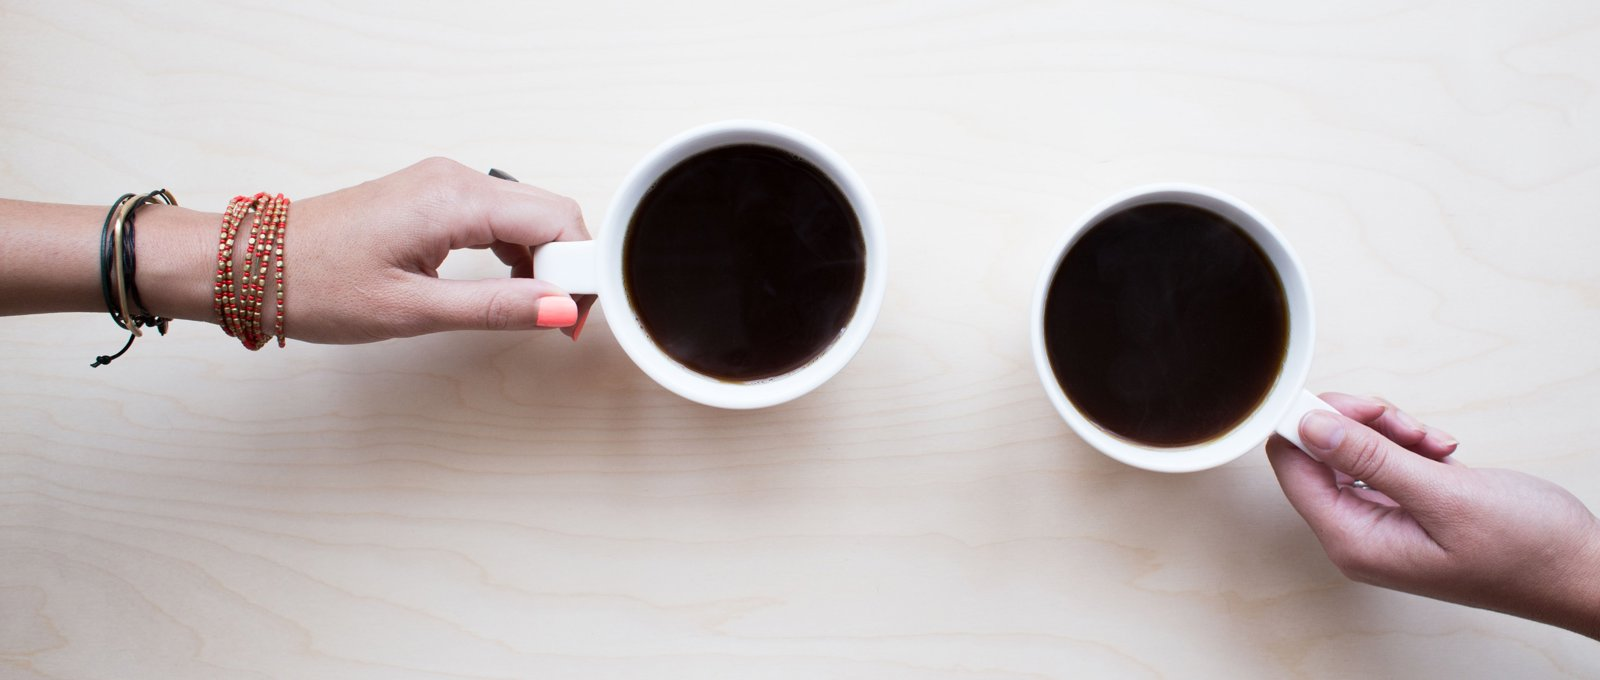 A shot from above of two mugs of black coffee, with a hand resting on each mug